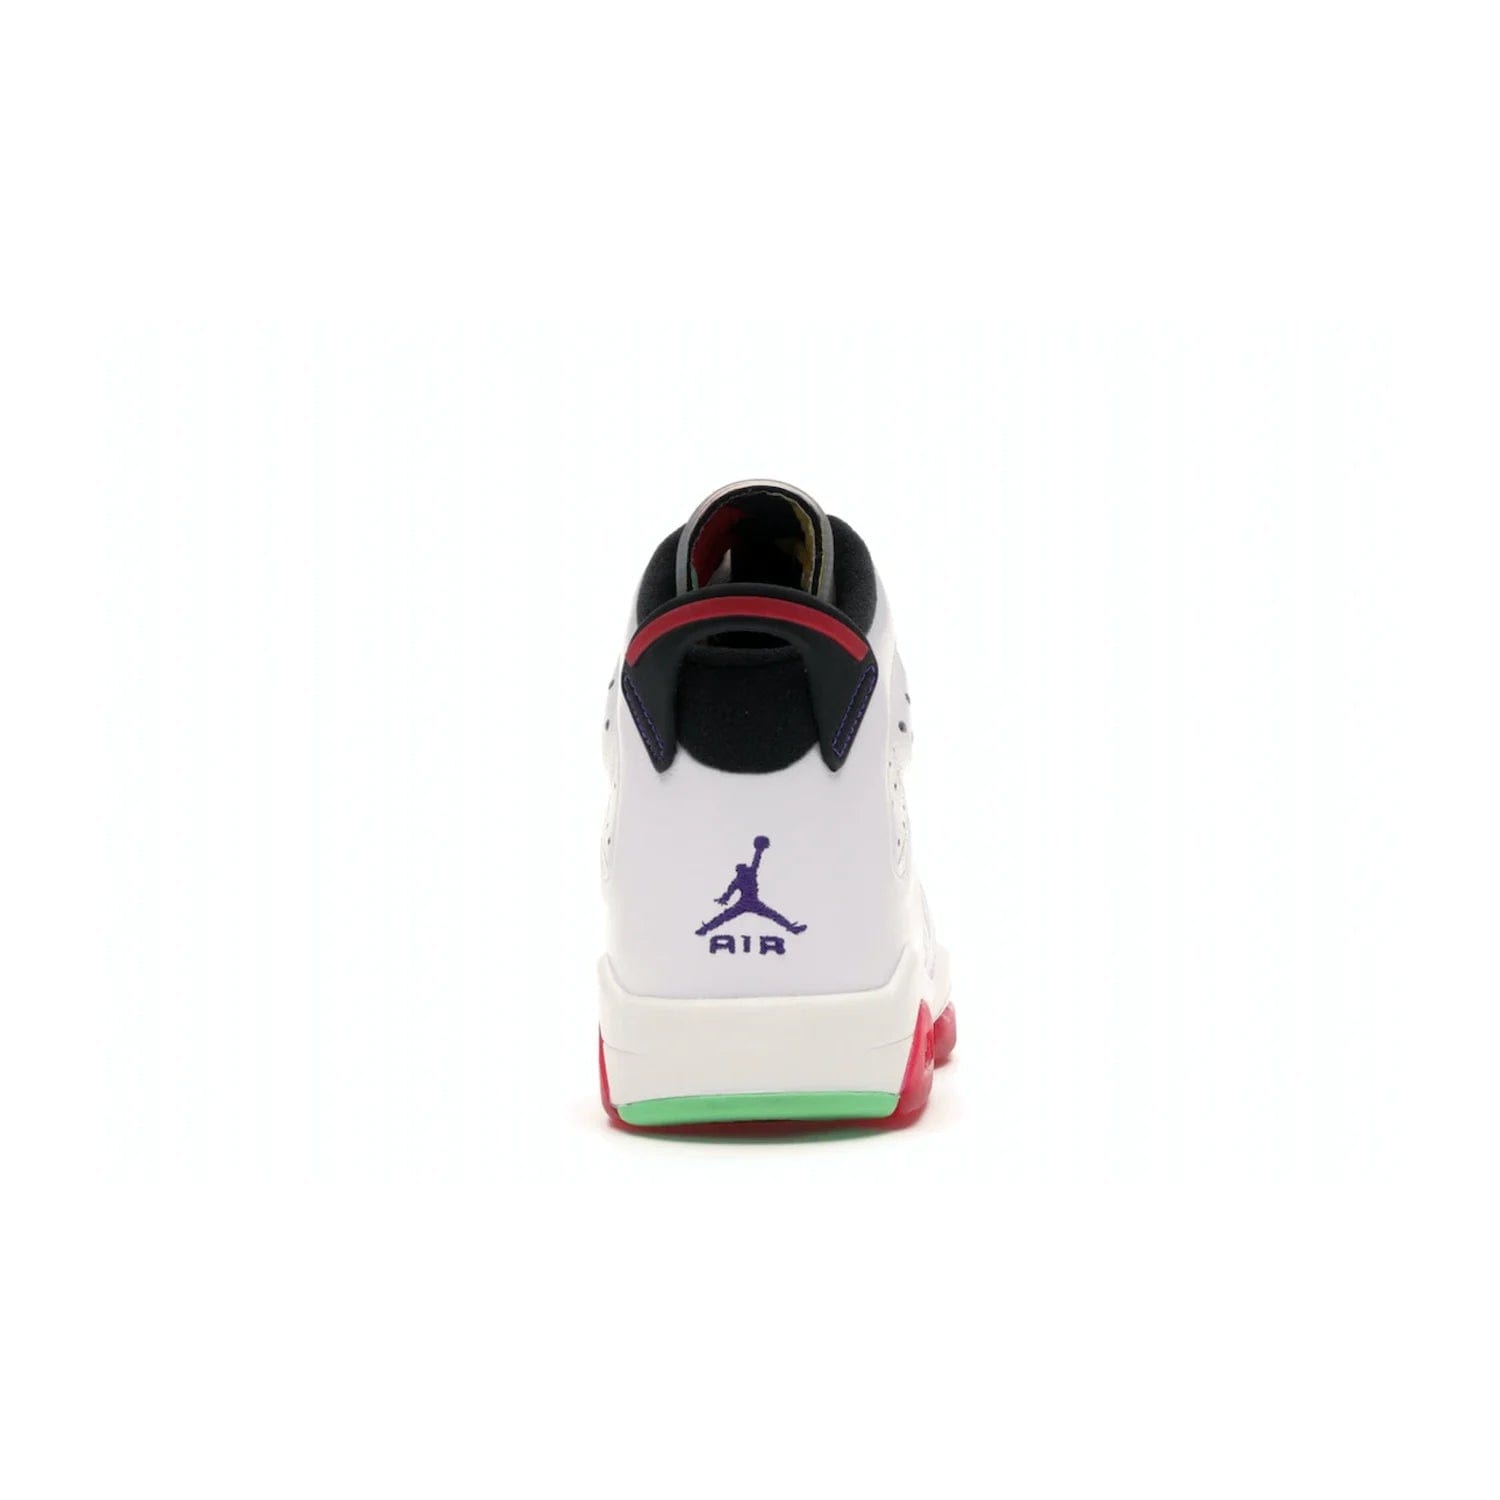 Jordan 6 Retro Hare (GS) - Image 28 - Only at www.BallersClubKickz.com - The Air Jordan 6 Hare GS. Comfortable suede upper, perforations, red pods, two-tone midsole, and signature "Jumpman" emblem. Released 17 June 2020. Perfect for any sneakerhead.